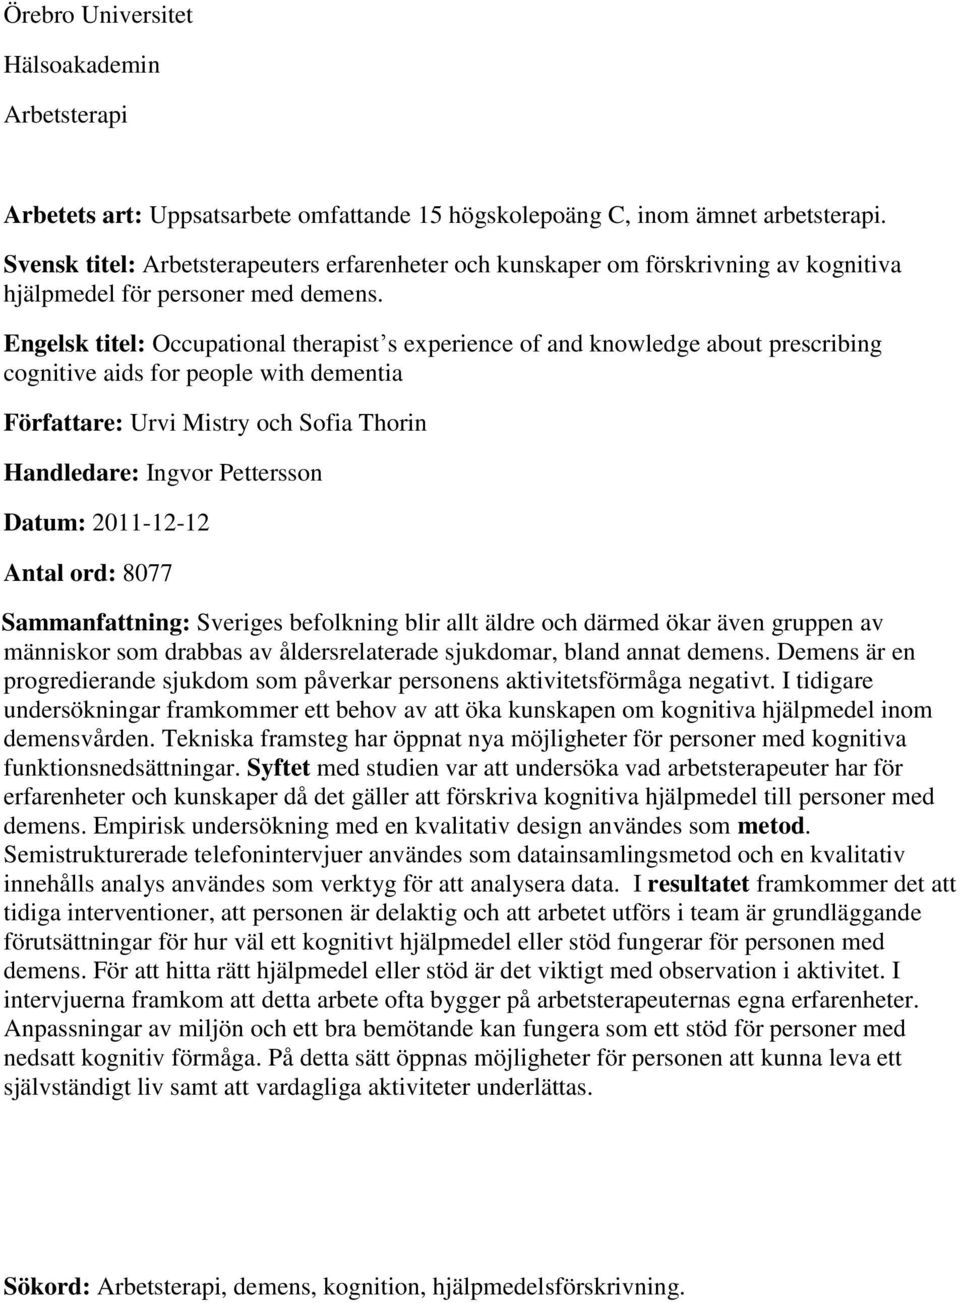 Engelsk titel: Occupational therapist s experience of and knowledge about prescribing cognitive aids for people with dementia Författare: Urvi Mistry och Sofia Thorin Handledare: Ingvor Pettersson